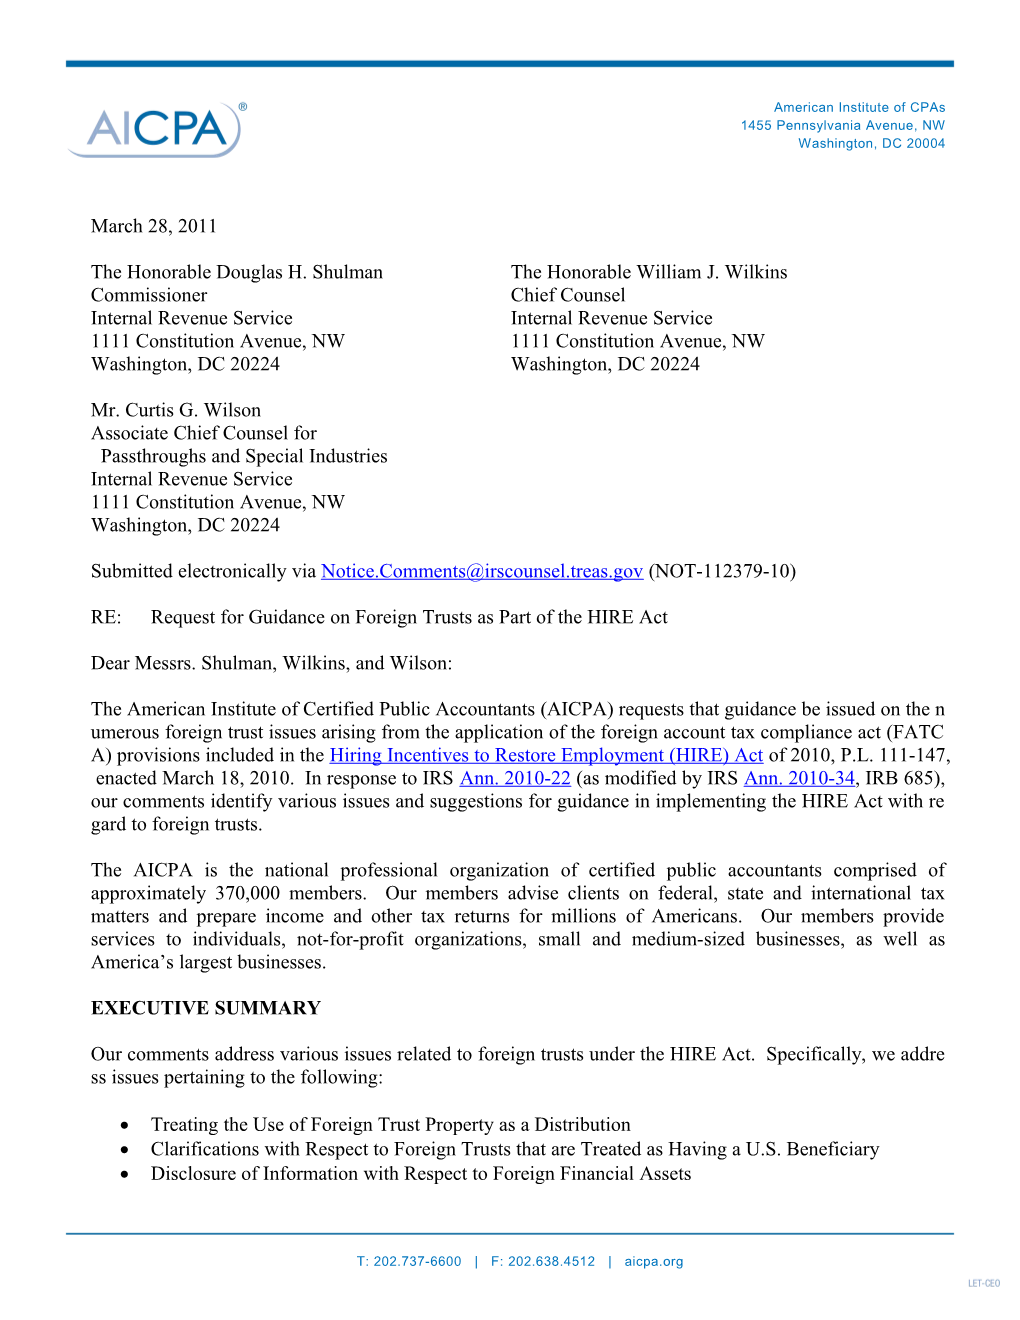 AICPA Comments on Foreign Trusts and the HIRE Act - March 28, 2011